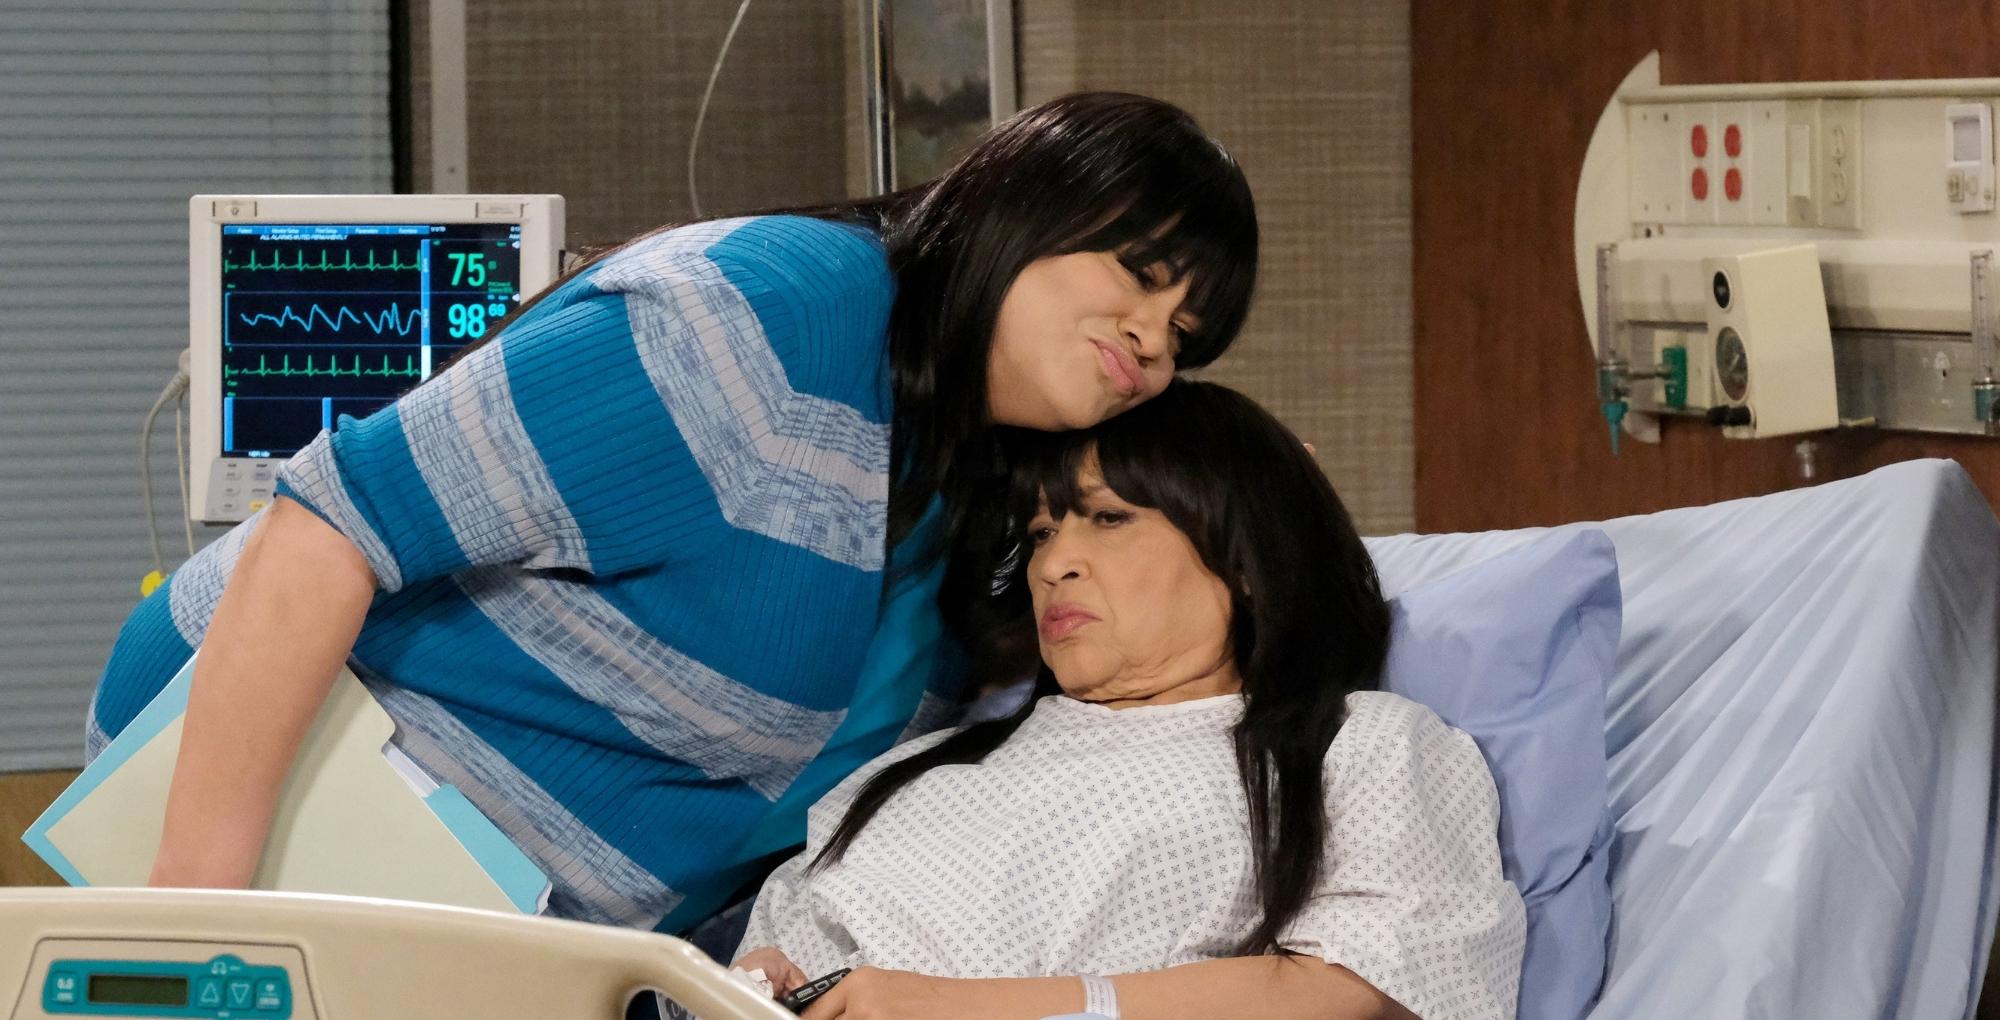 days of our lives spoilers for friday, june 9, 2023, show paulina price being cared for by a naughty nurse.